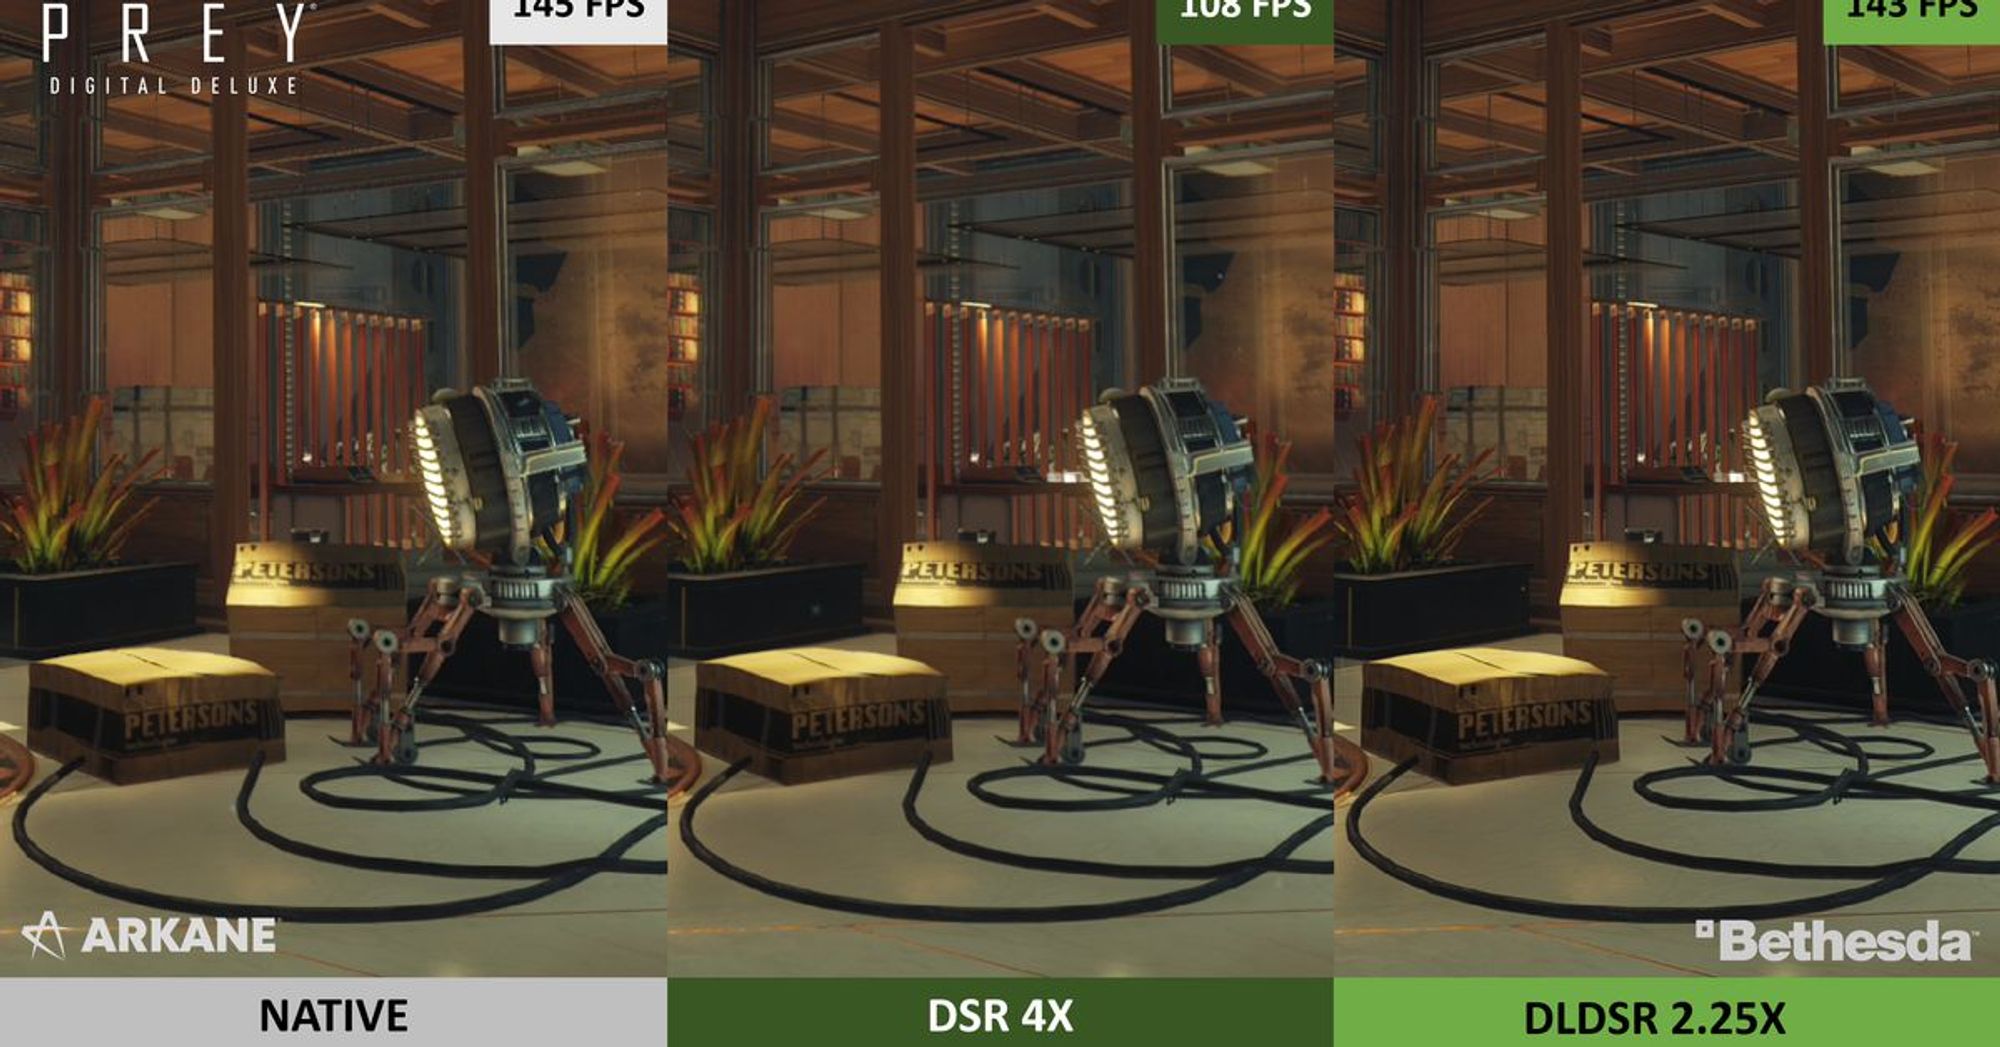 Nvidia's AI-powered scaling makes old games look better without a huge performance hit